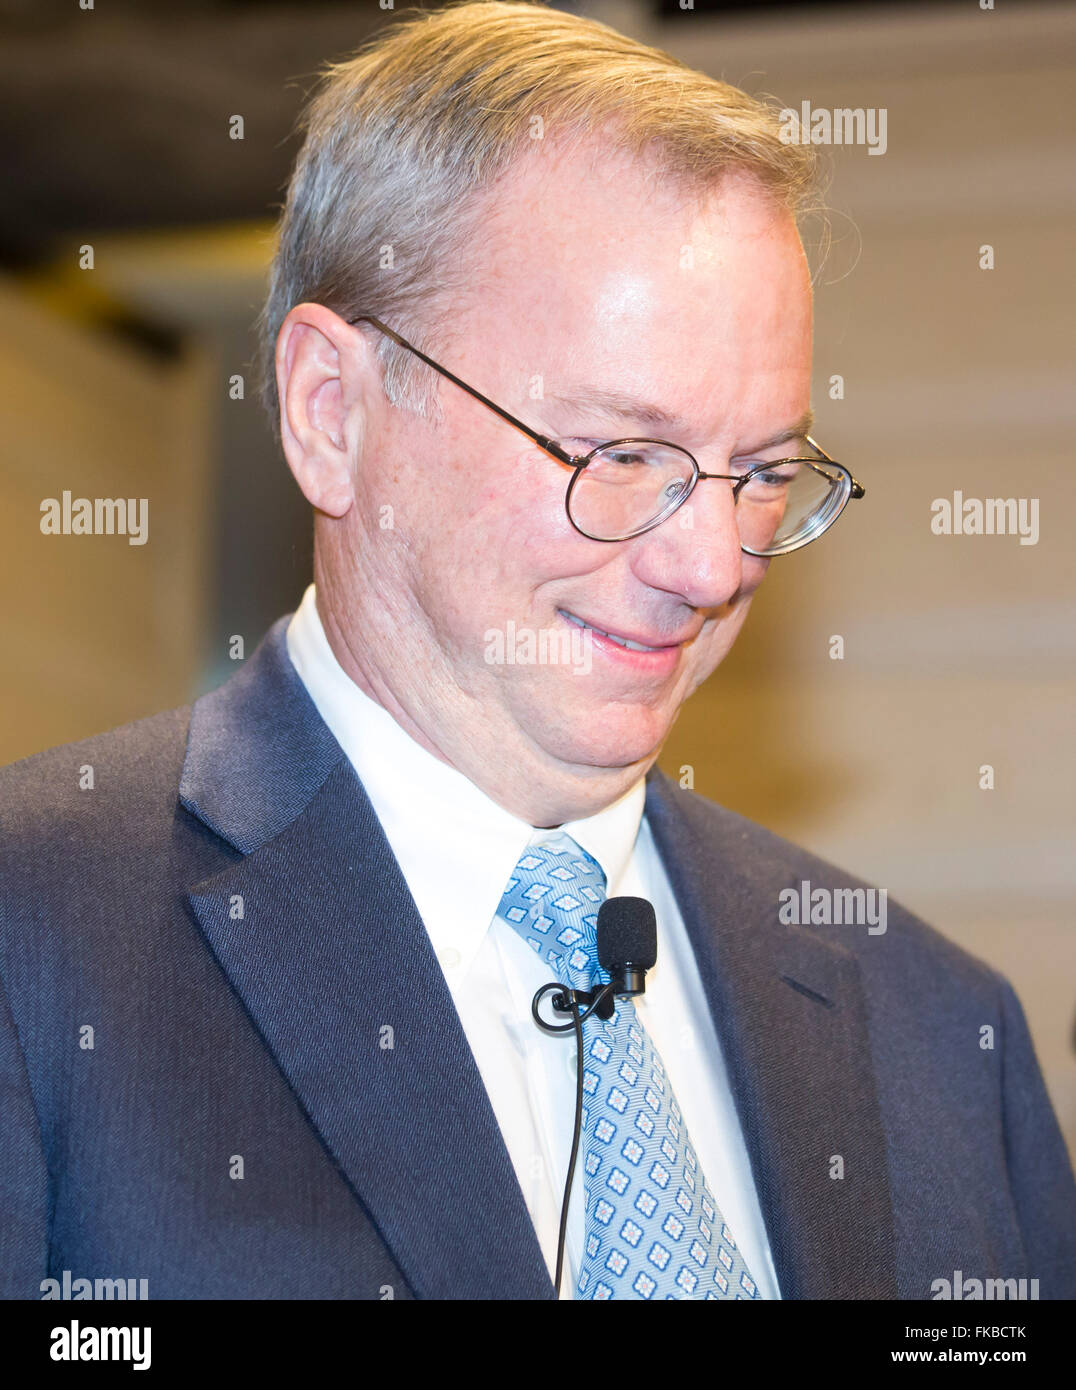 Eric Schmidt, Mar 8, 2016 : Google Chairman Eric Schmidt arrives for a pre-match press conference in Seoul, South Korea. The historic human-computer showdown in the ancient board game Go begins on Wednesday in Seoul, with the winner's prize of US$1 million at stake. The matches will be also held at the same place on Thursday, Saturday and Sunday and will end next Tuesday. The prize will be donated to UNICEF and other charities, if AlphaGo wins, local media reported. © Lee Jae-Won/AFLO/Alamy Live News Stock Photo